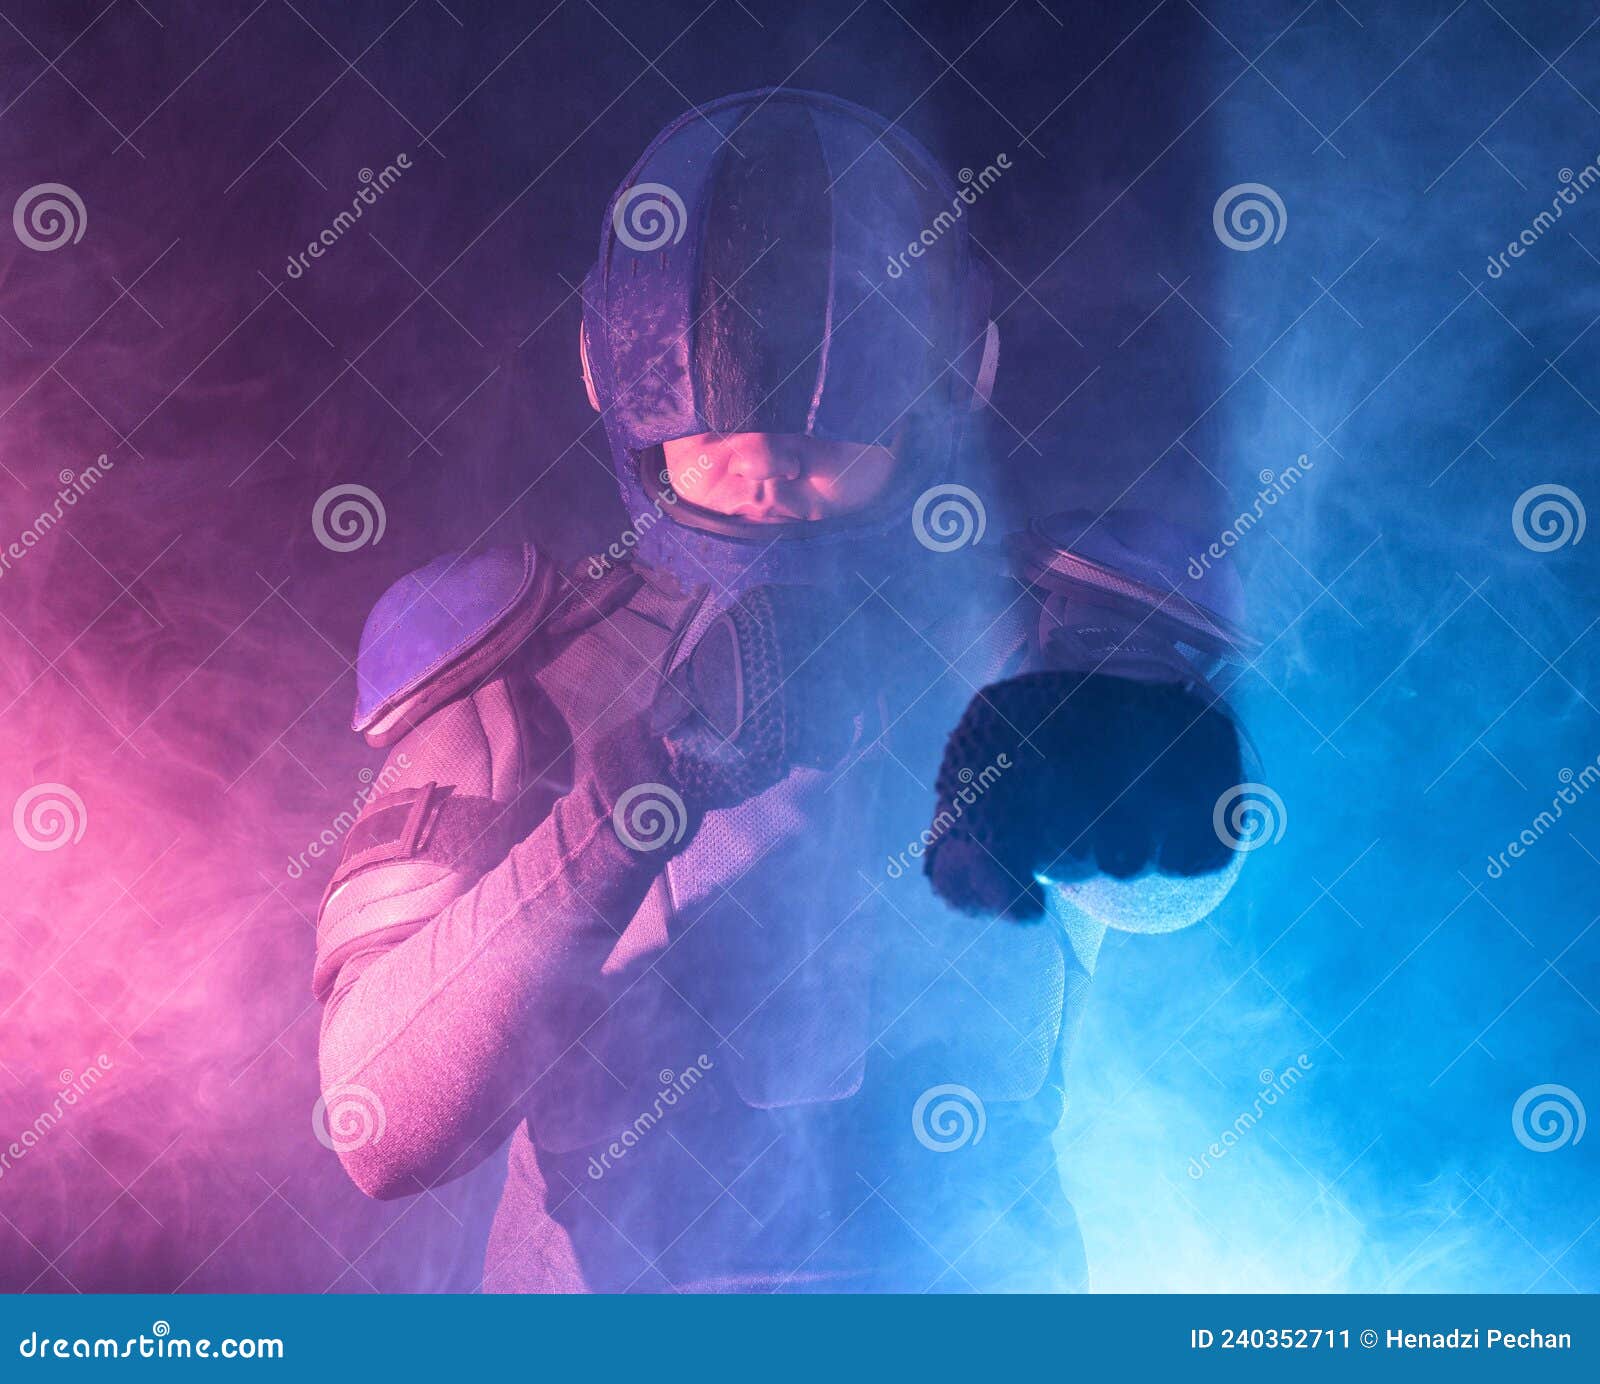 male robot cop waves and punches his fits in dark. halfman is ready for fight. bionic cyborg looks at camera. red blue light. law